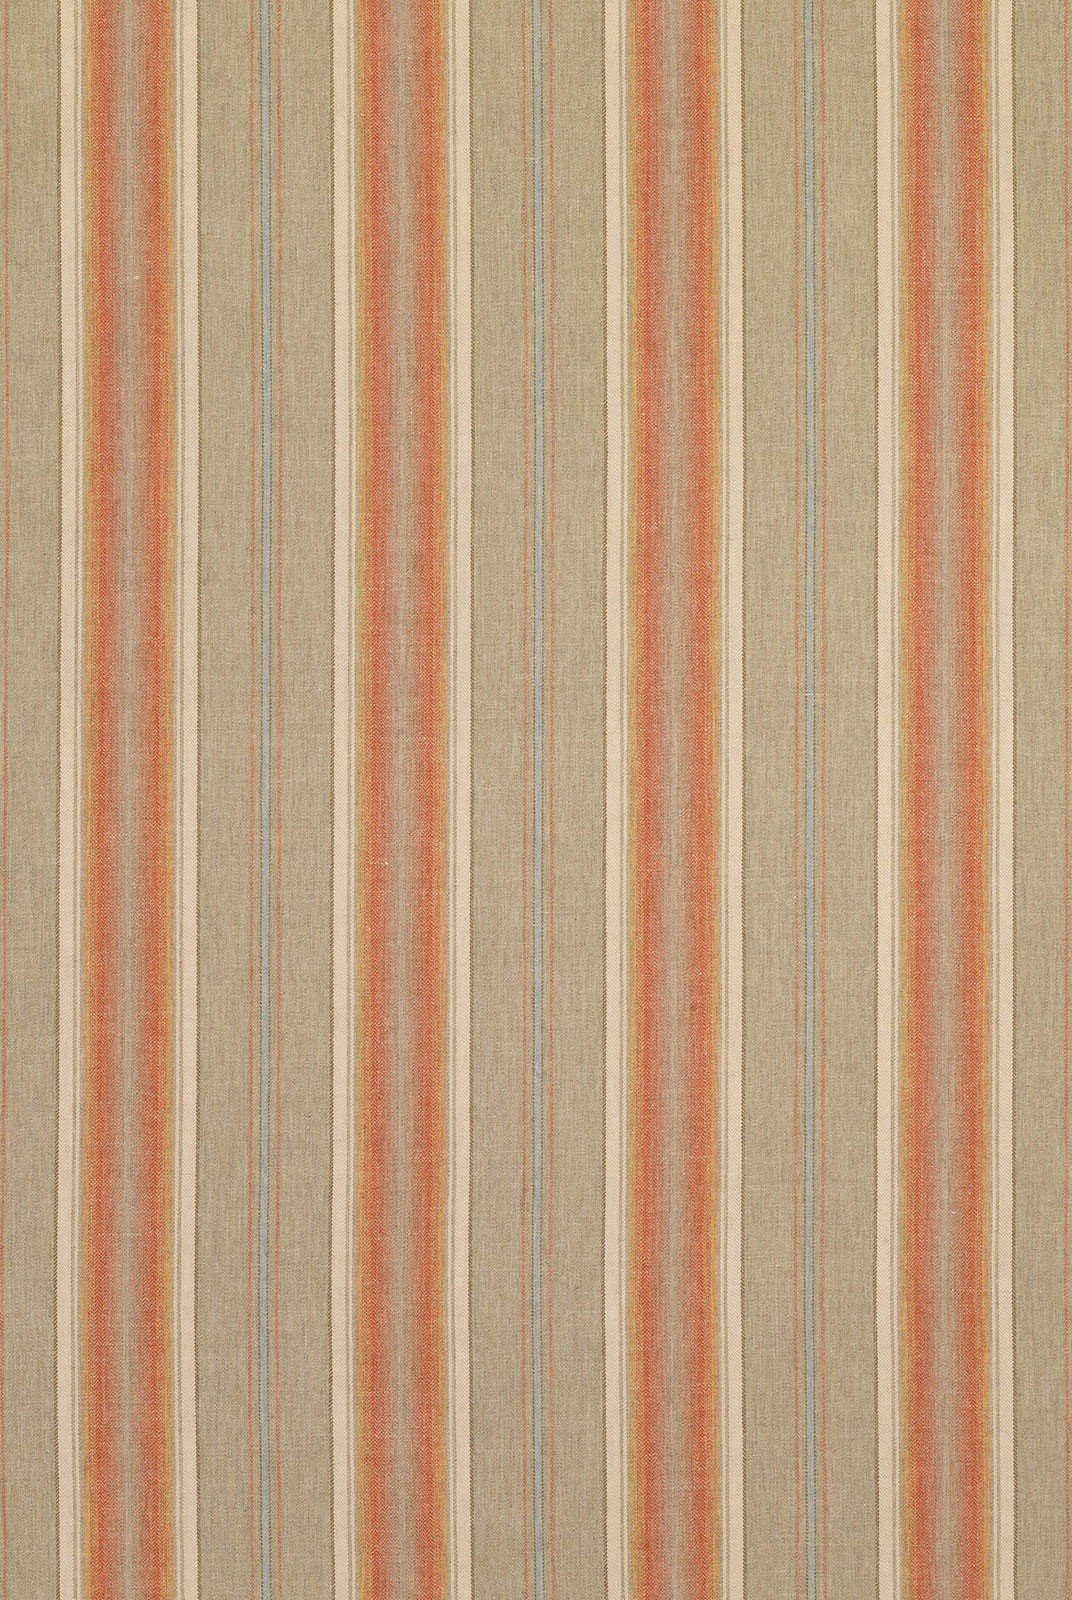 Nina Campbell Fabric - Brodie Innis Stripe Coral/Linen NCF4141-01